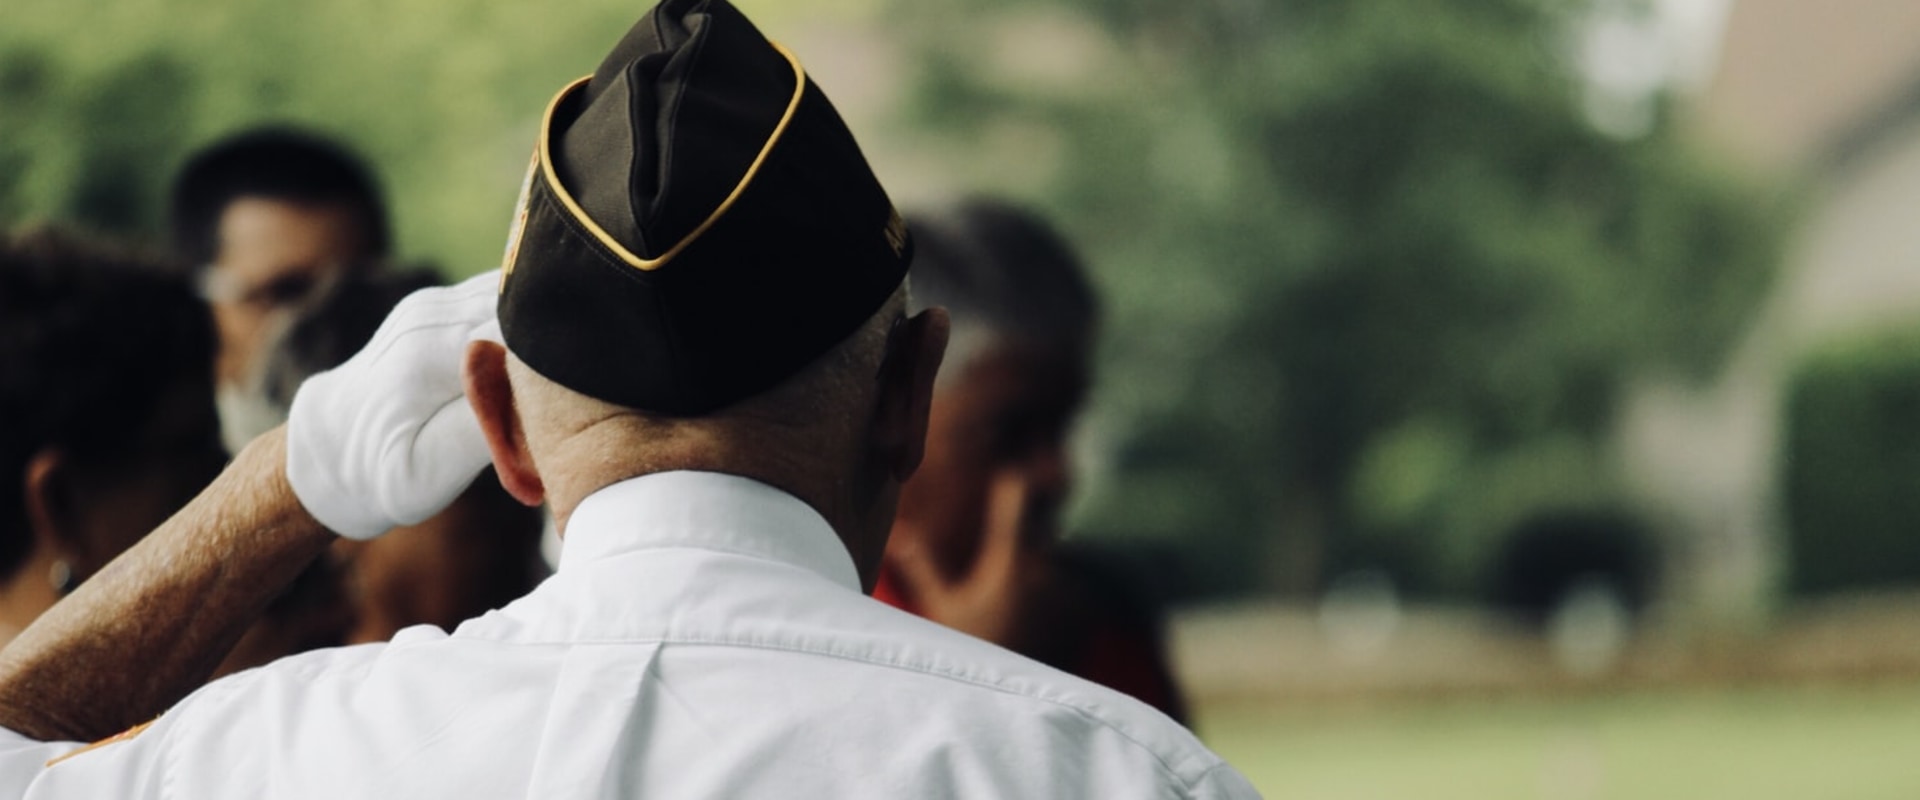 Veteran Moving Assistance: Providing Free Services for Veterans